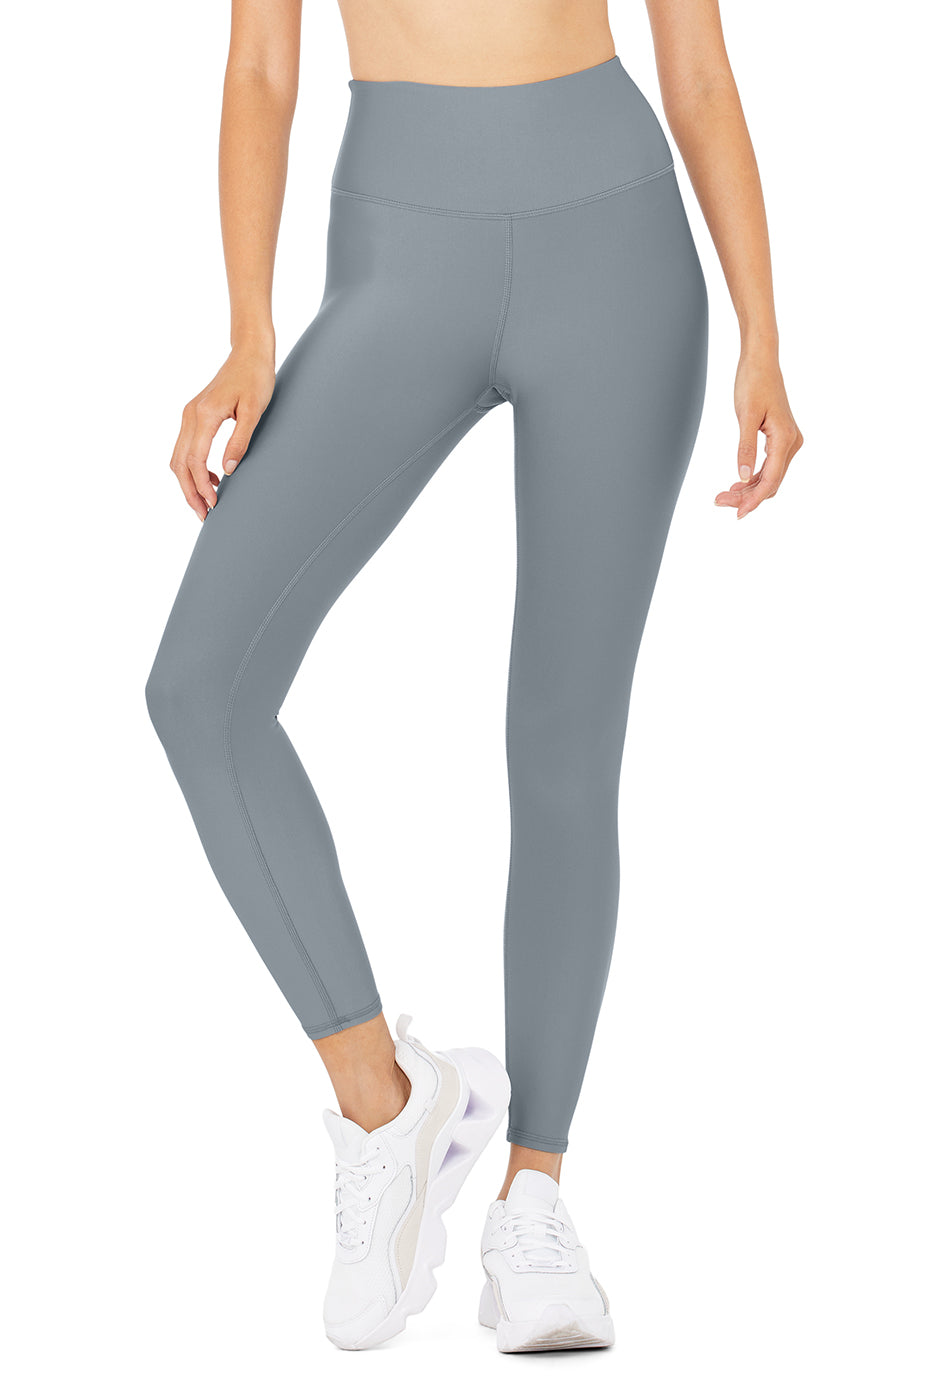 7/8 High-Waist Airlift Legging in Steel Blue by Alo Yoga - Work Well Daily